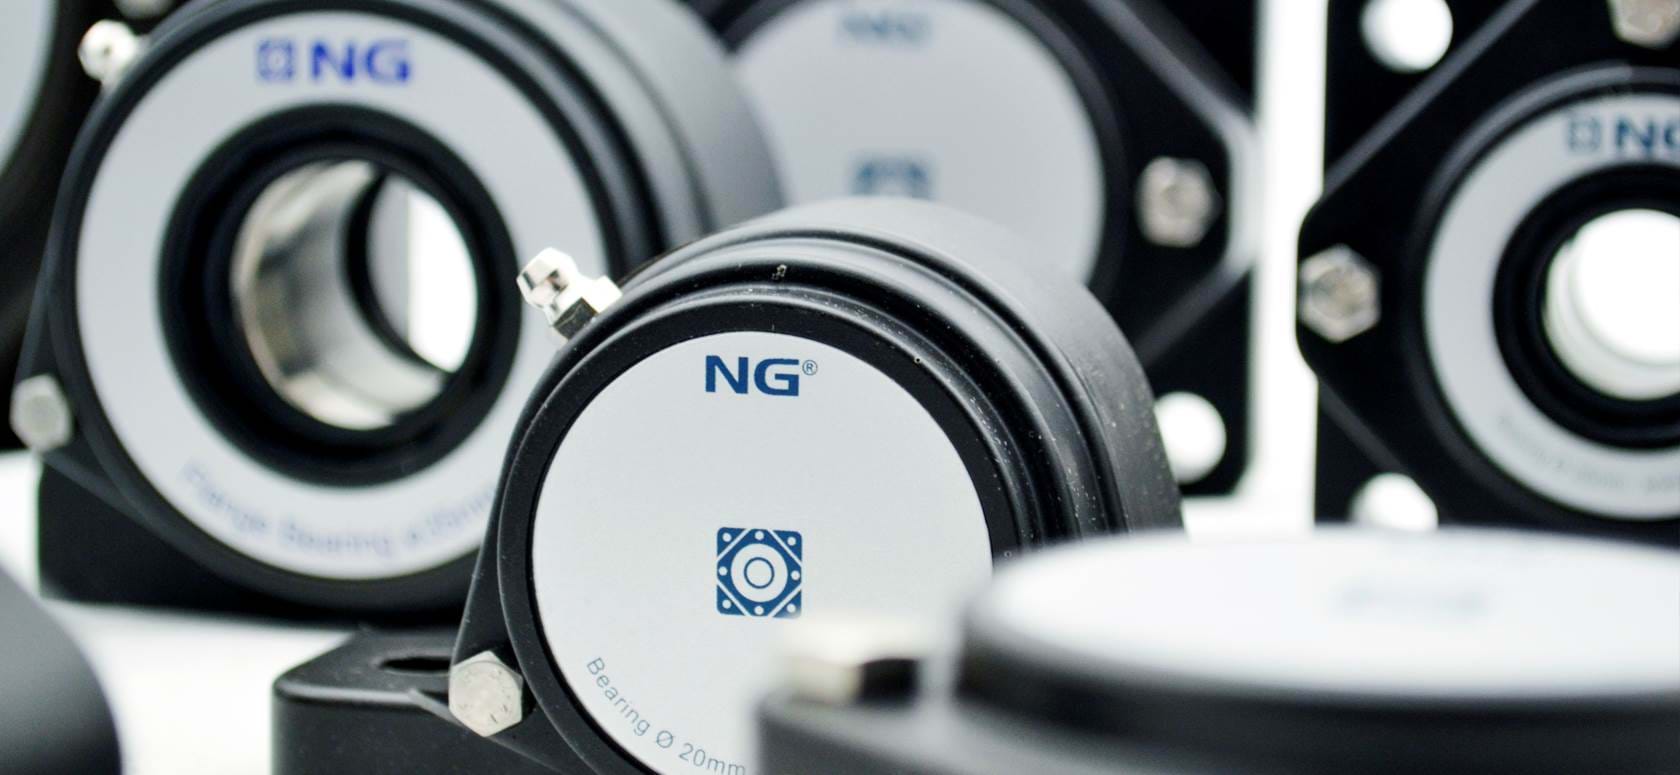  Various NG bearings with open and closed covers